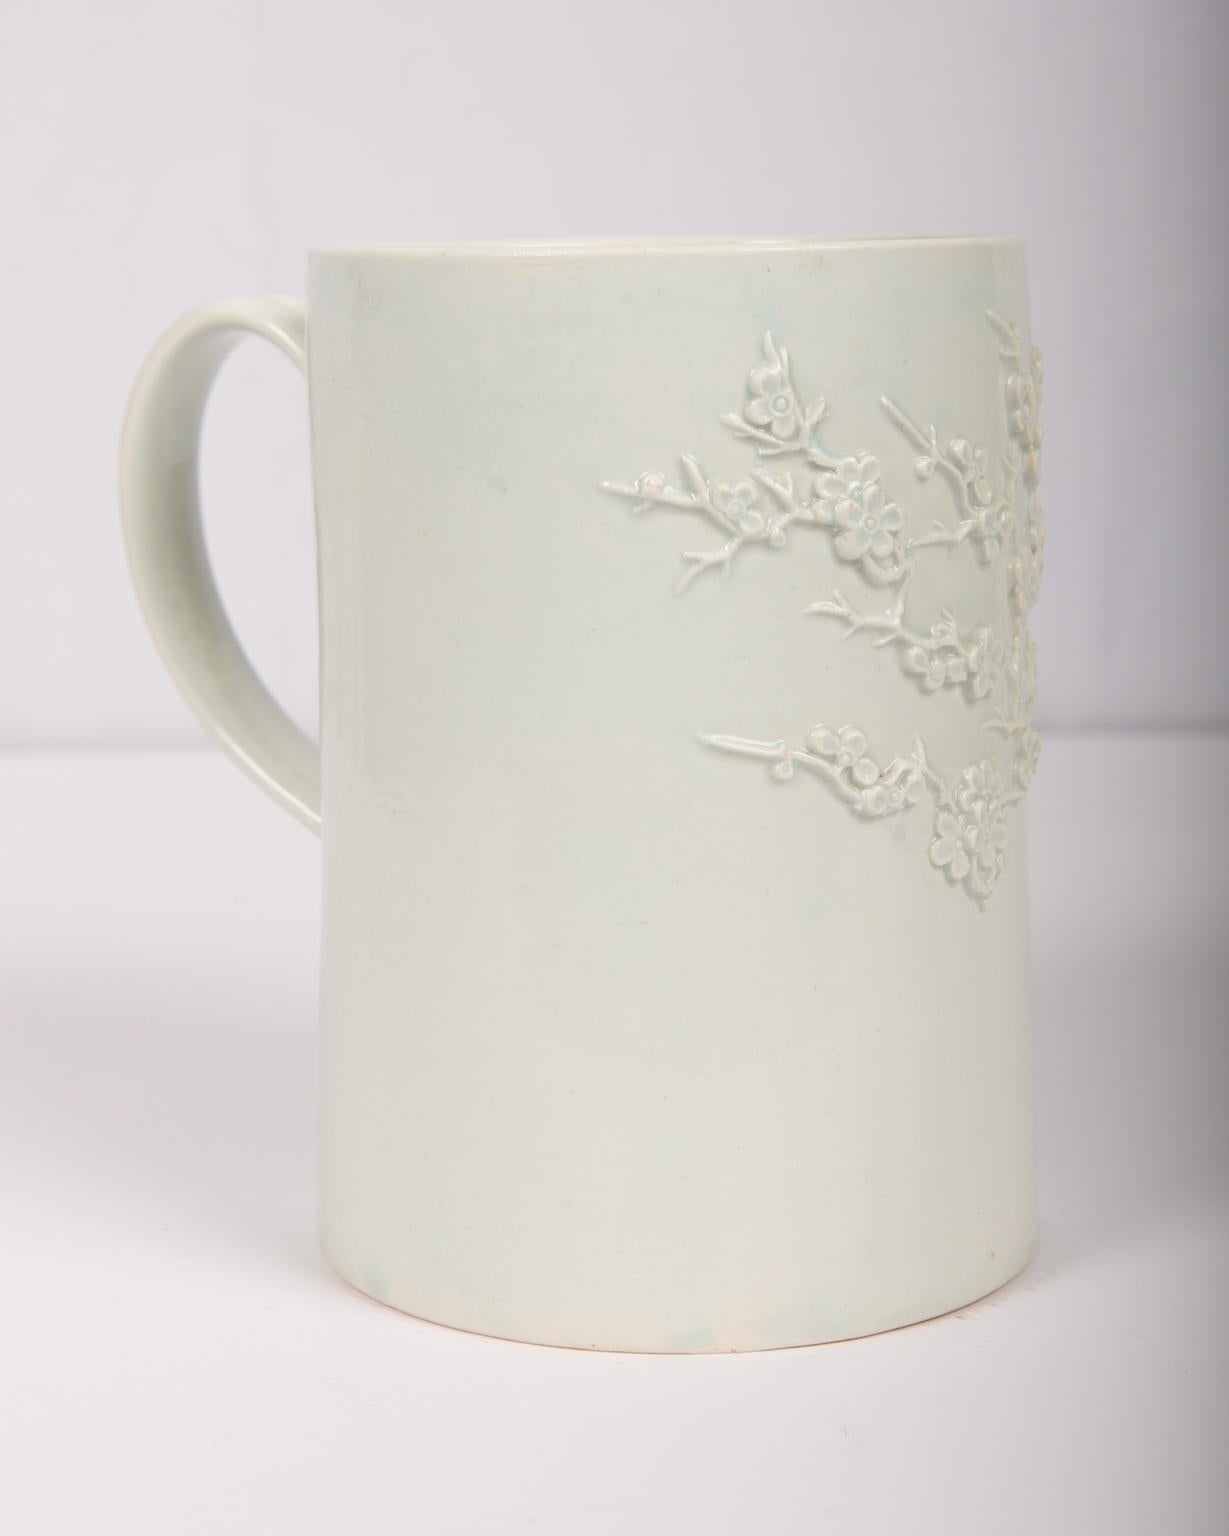 A tall Bow Porcelain tankard dating from the mid-18th century, 1755-1758. It features a profusion of delicately modeled prunus flower sprigs on the exterior. Though the mug is completely white, these flowers stand out beautifully because they are